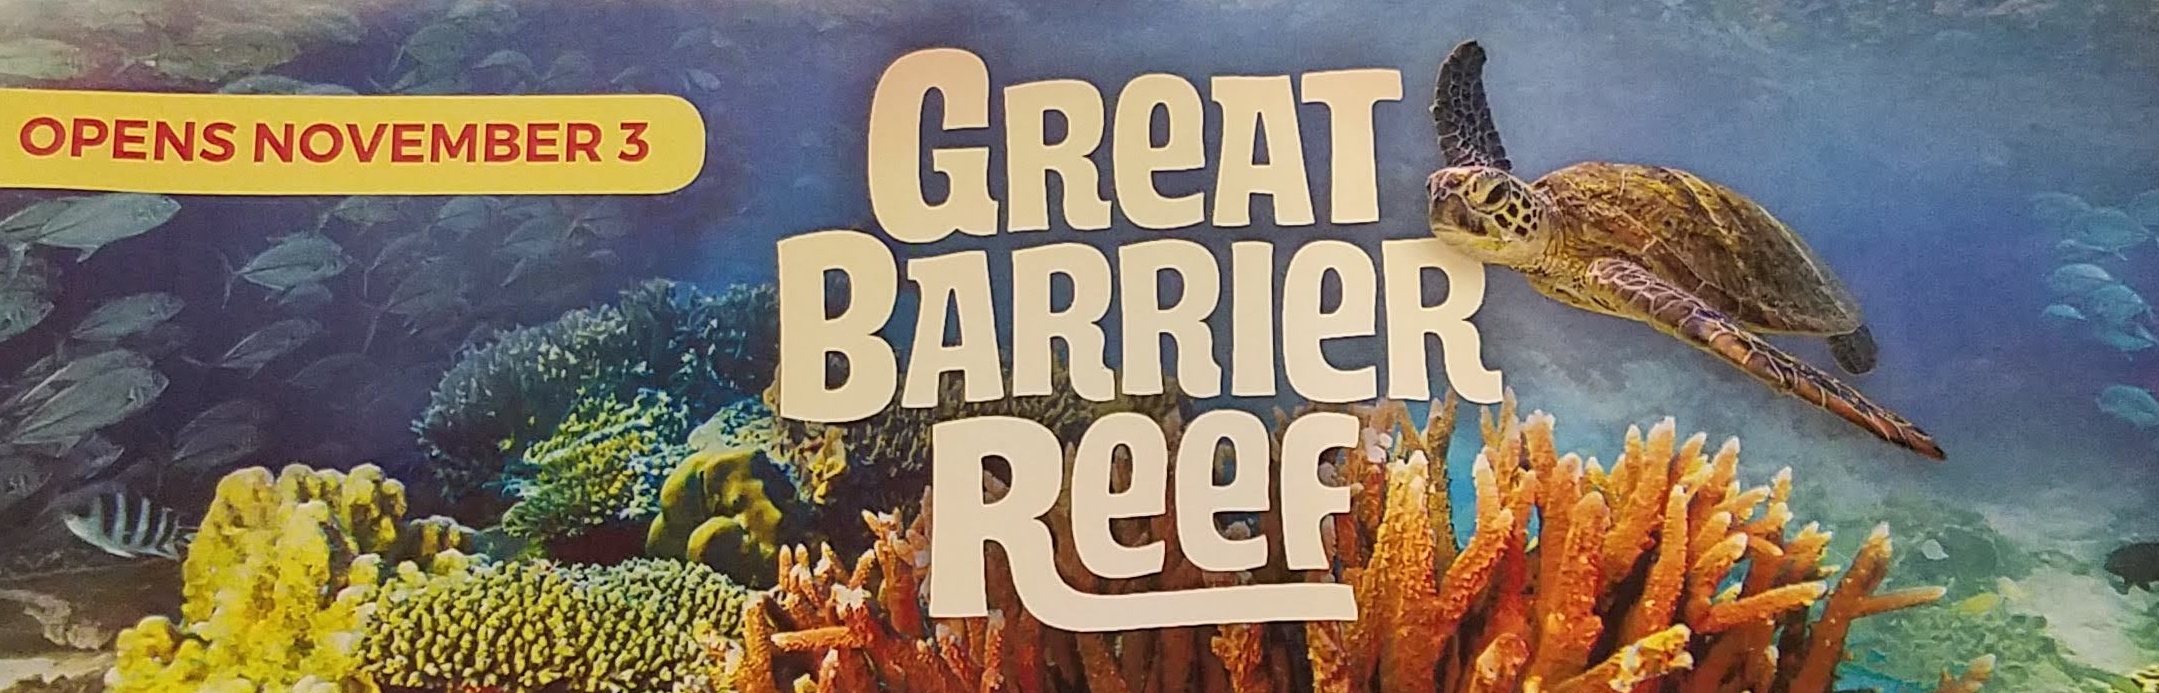 GLSC Great Barrier Reef Movie Proves to be Turtle-tastic!!